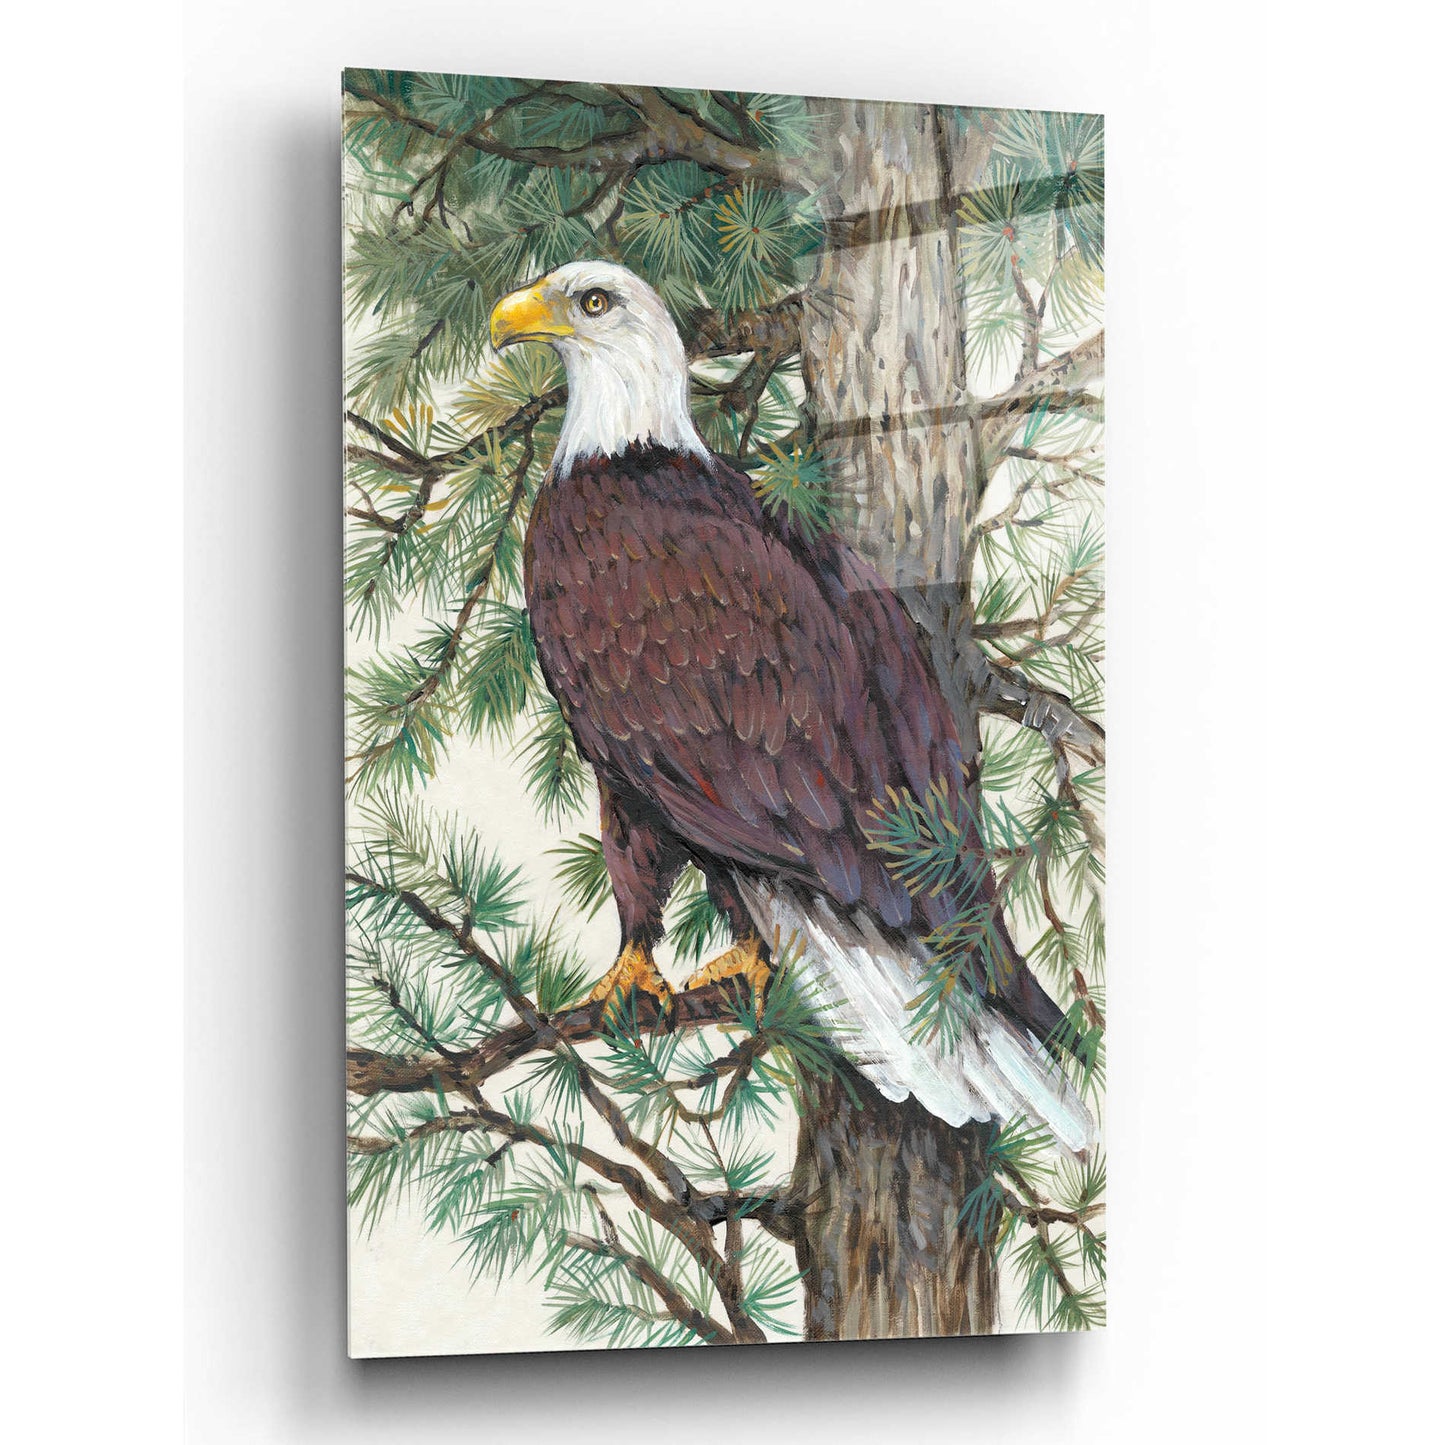 Epic Art 'Eagle in the Pine' by Tim O'Toole, Acrylic Glass Wall Art